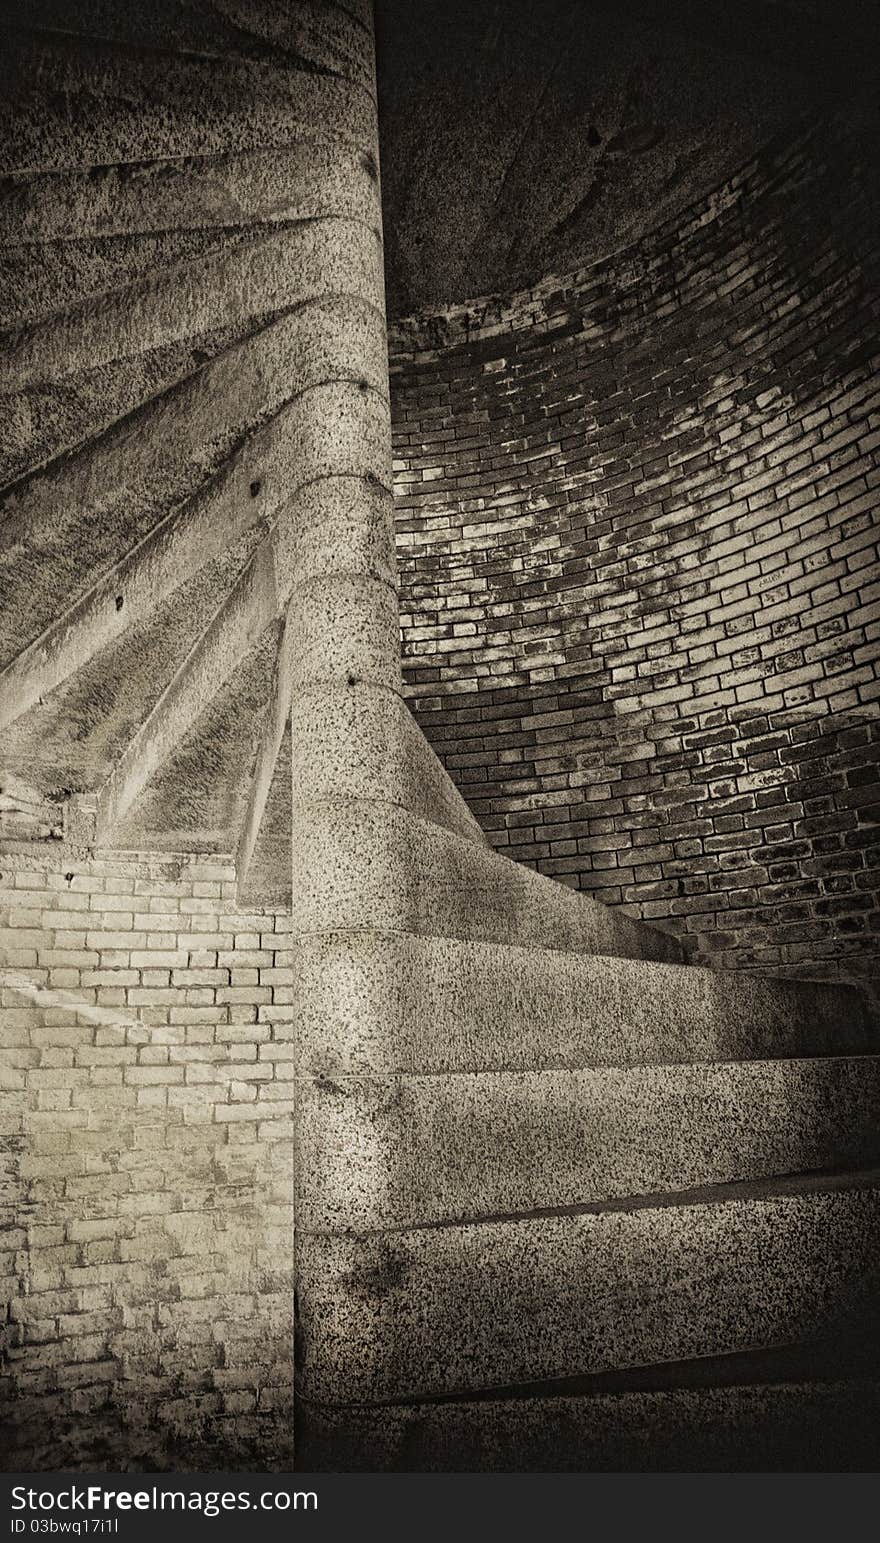 Grim and spooky stone staircase in old brick building. Monochrome sepia. Grain added for atmosphere. Grim and spooky stone staircase in old brick building. Monochrome sepia. Grain added for atmosphere.